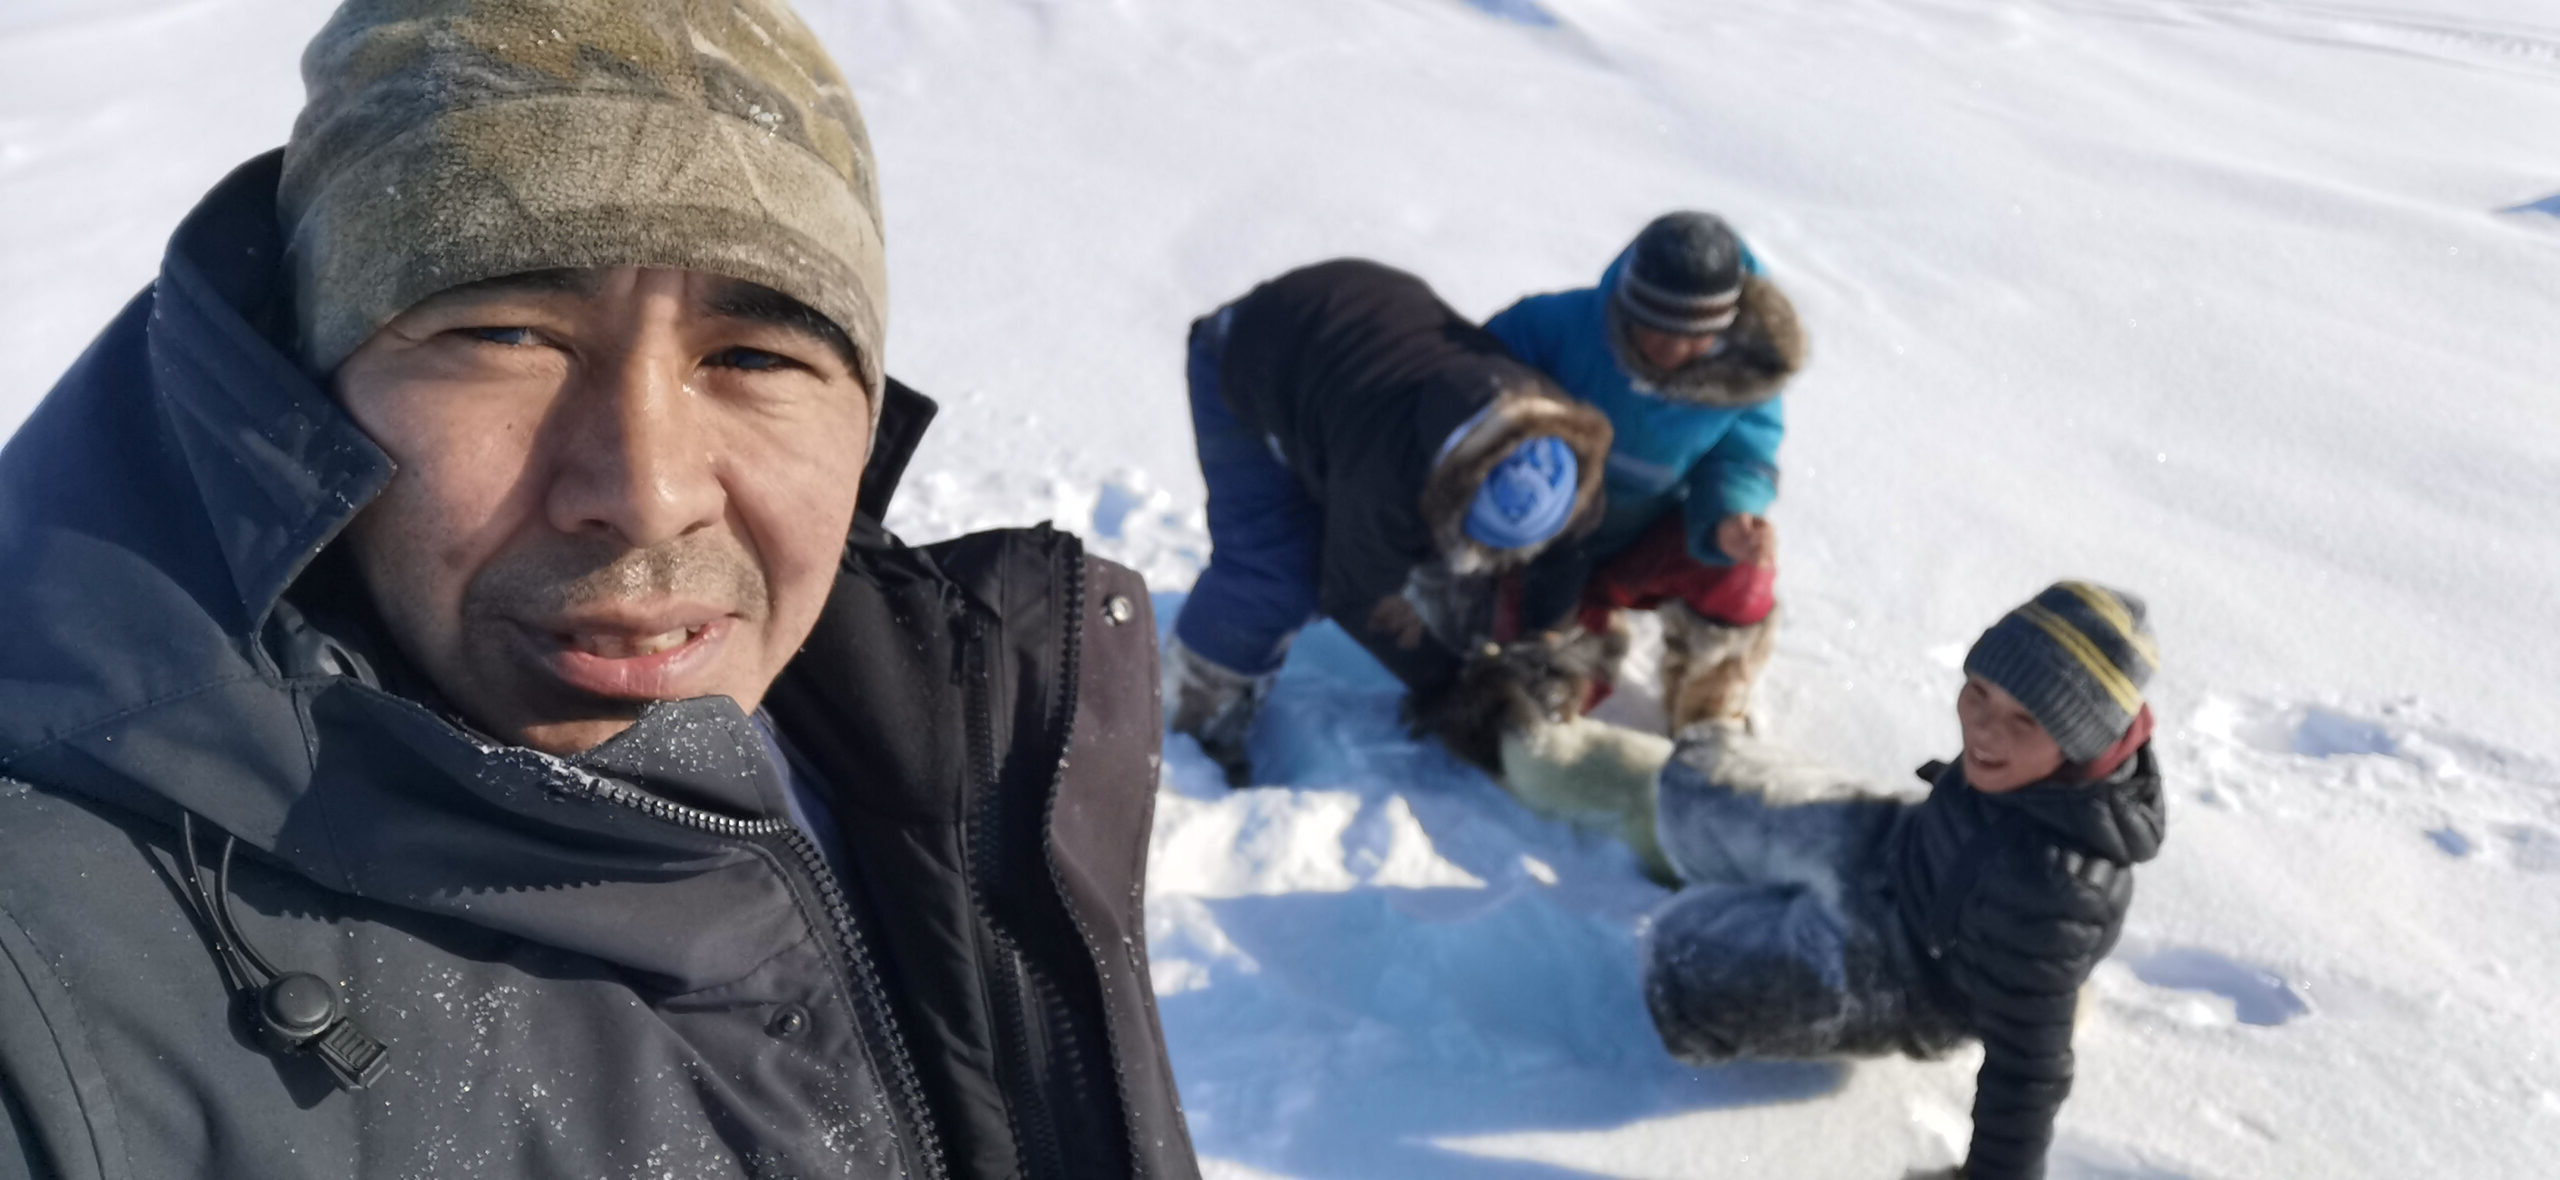 A man standing foreground with children behind him ice fishing